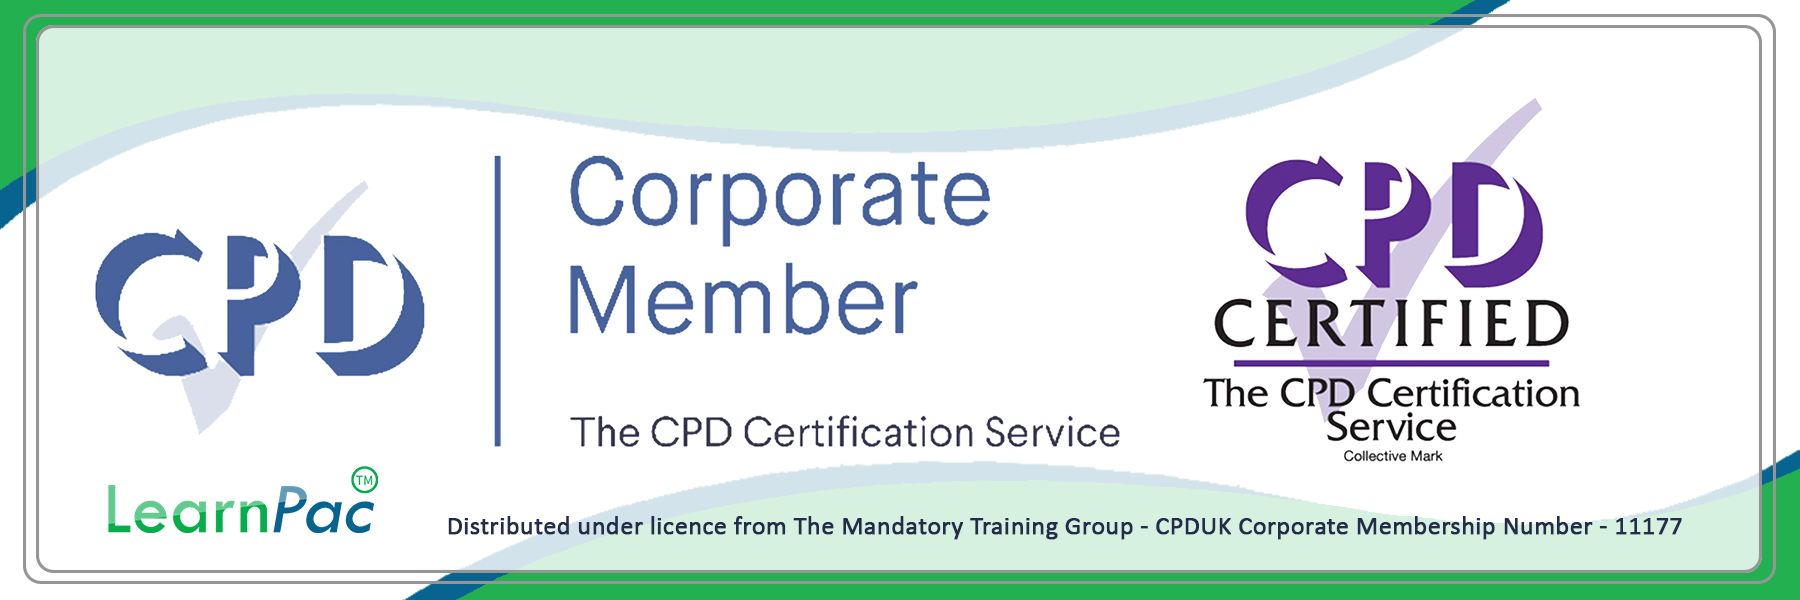 Manual Handling Training - E-Learning Courses with Certificates - CPD Certified - LearnPac Systems UK -